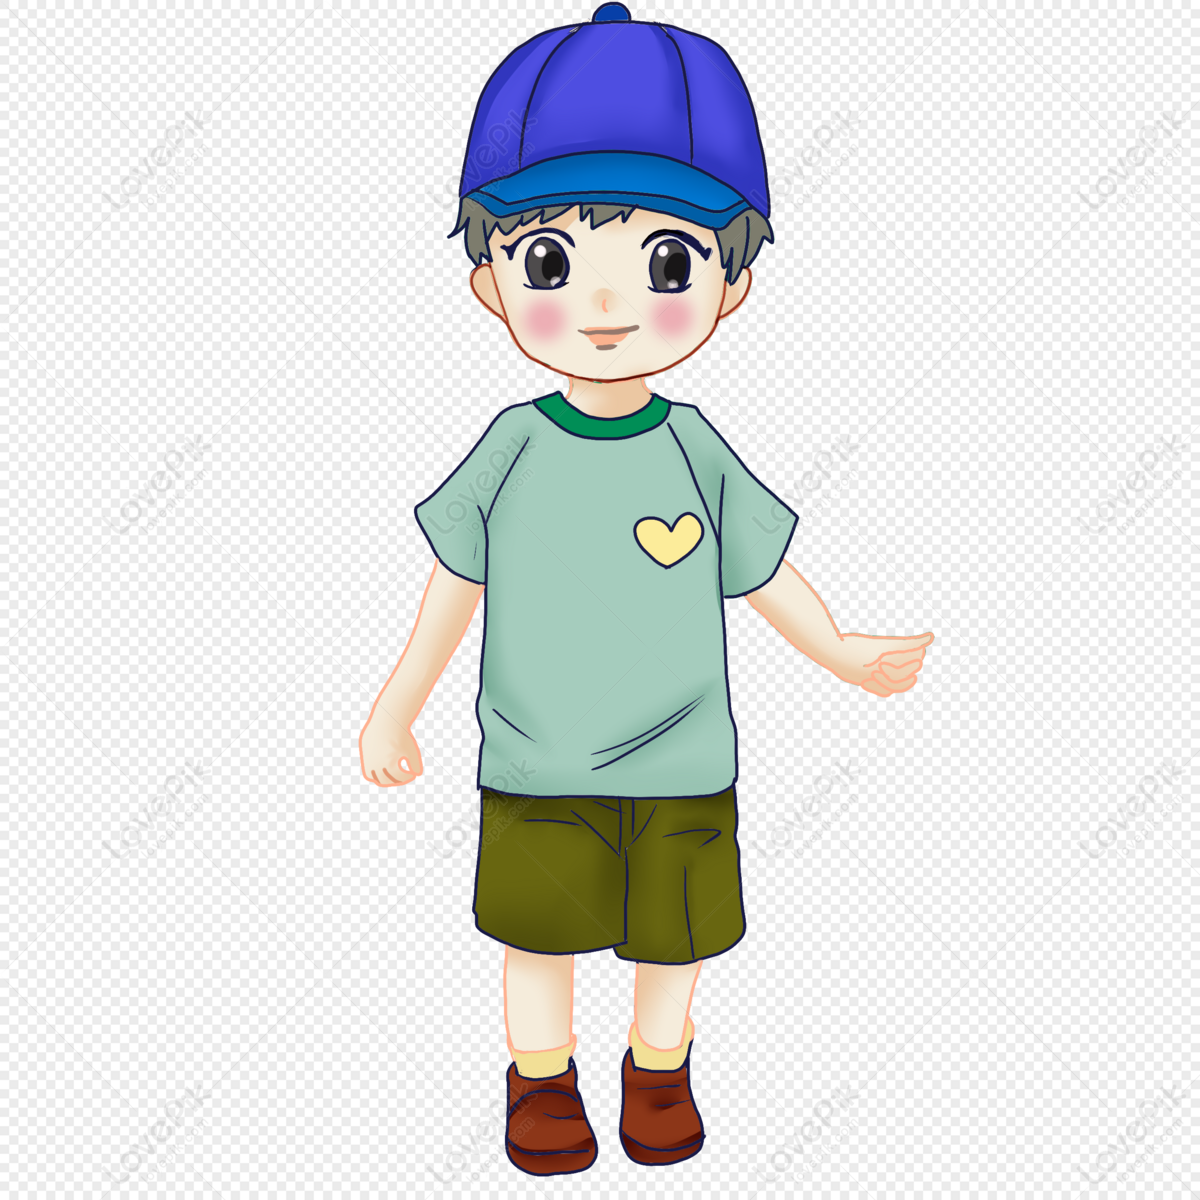 Little Boy Png Transparent Background And Clipart Image For Free Download -  Lovepik | 401323450